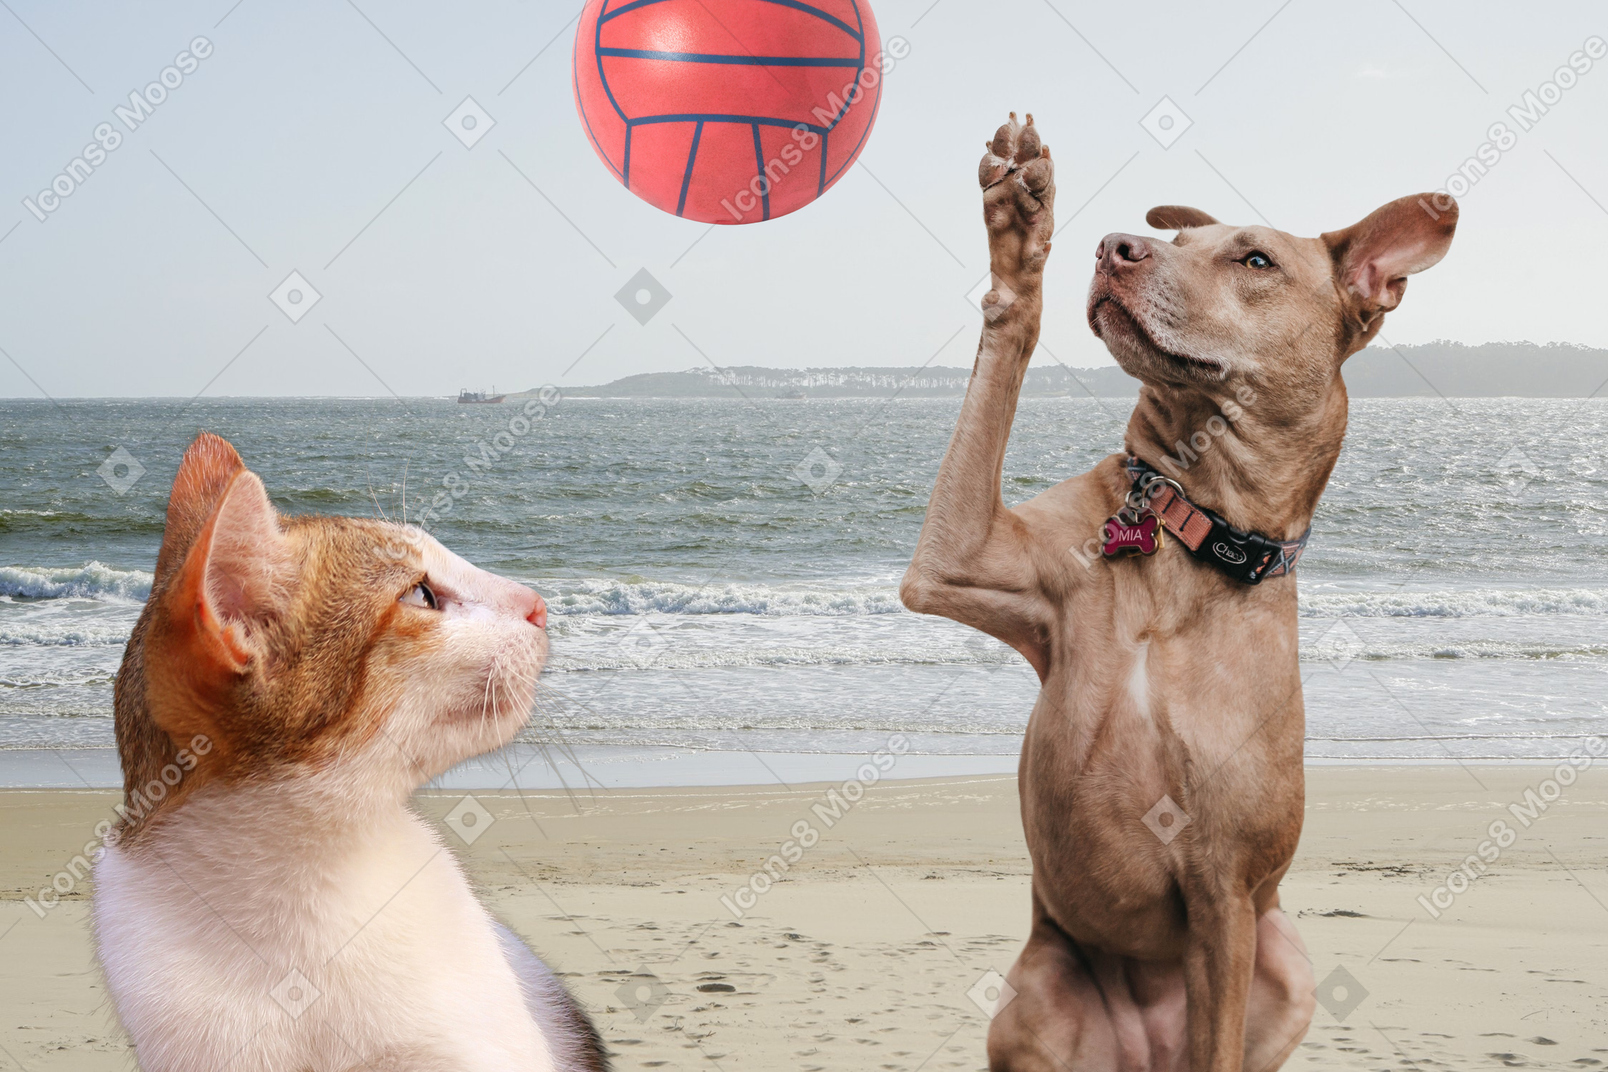 Dog playing with a ball on the beach